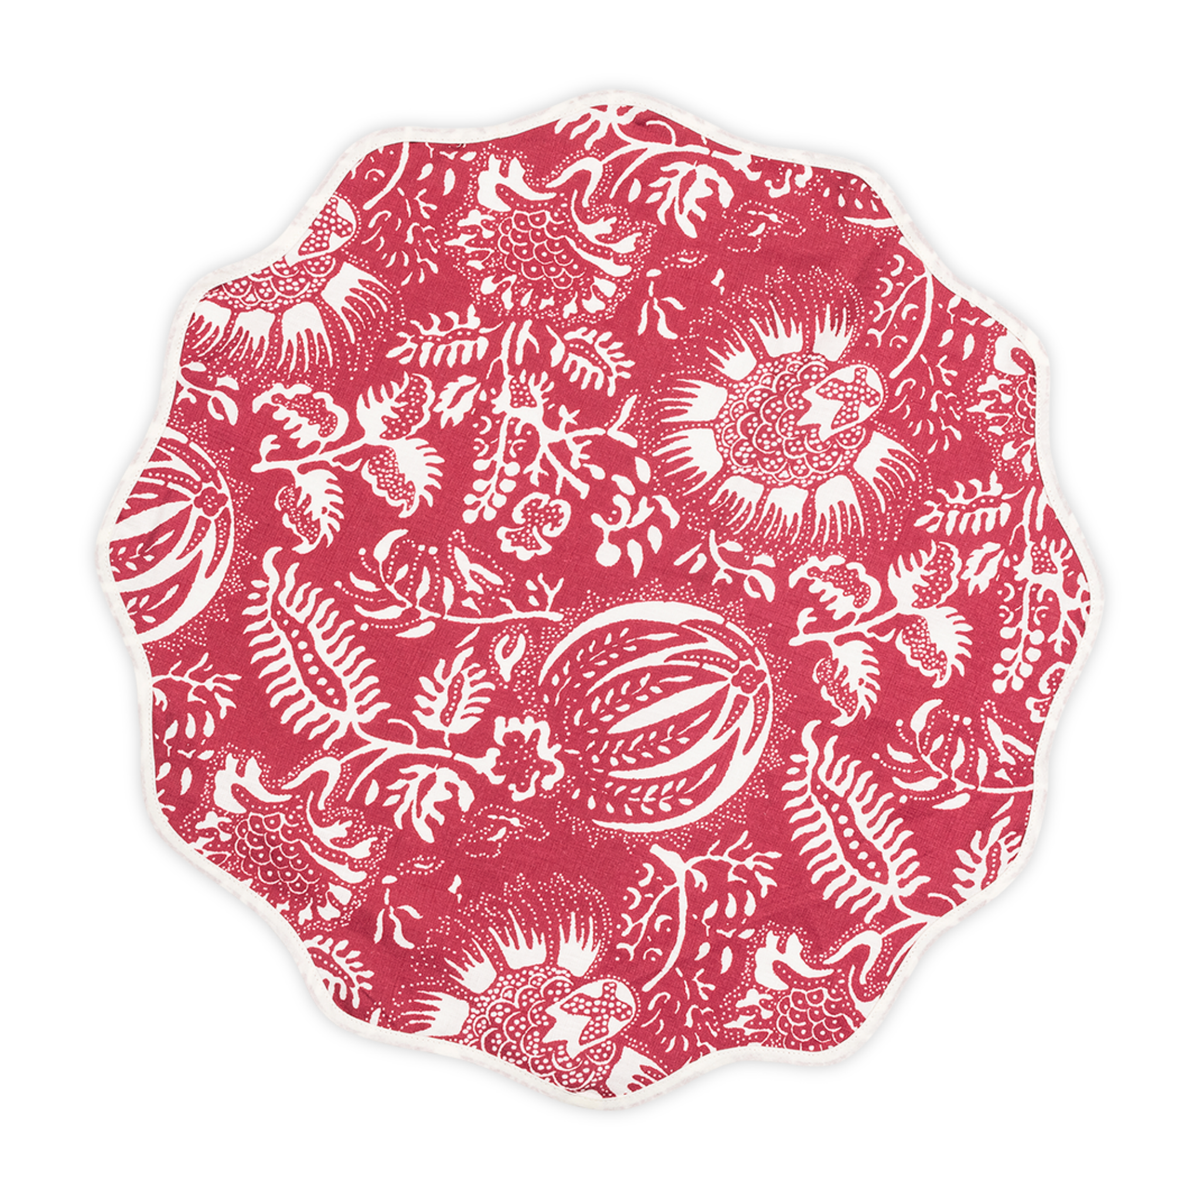 Silo Image of Matouk Granada Table Round Placemat in Scarlet Color